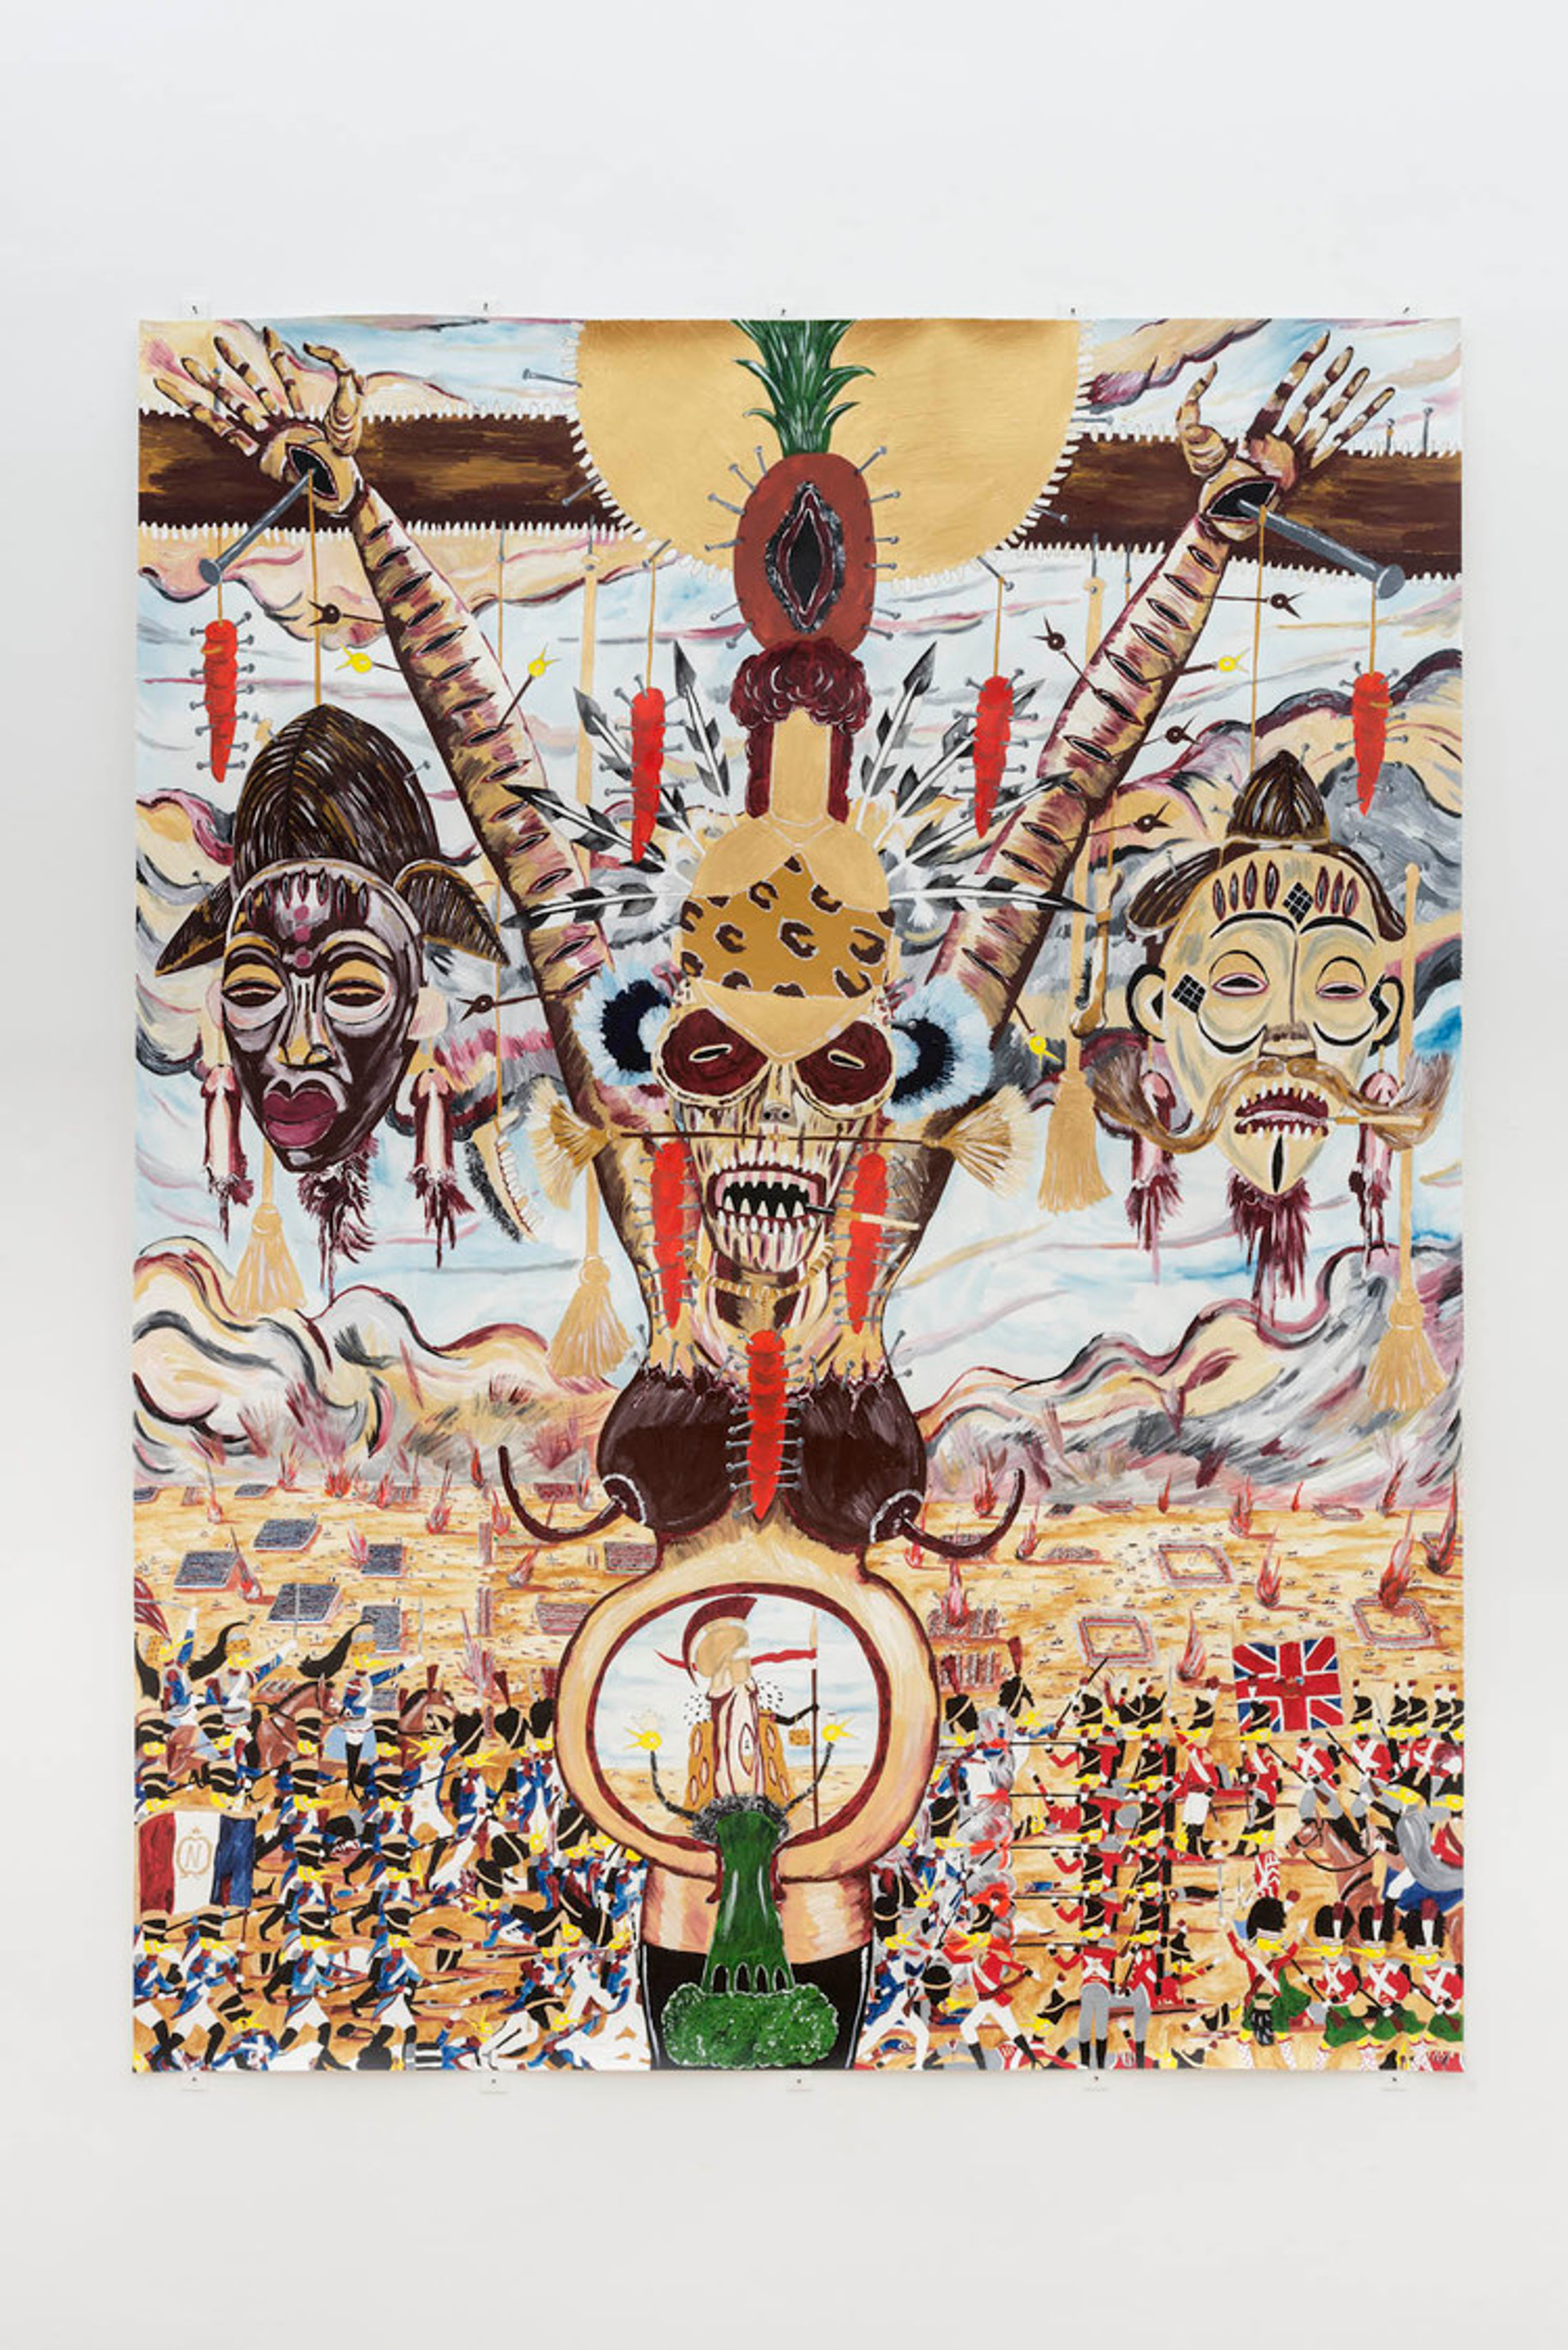 Andrew Gilbert, “The Death of Shaka Napoleon and Birth of the Holy Brocoli, 1815”, 2014, acrylic, watercolor and fineliner on paper, 200 × 150 cm, Photo by Leonie Felle